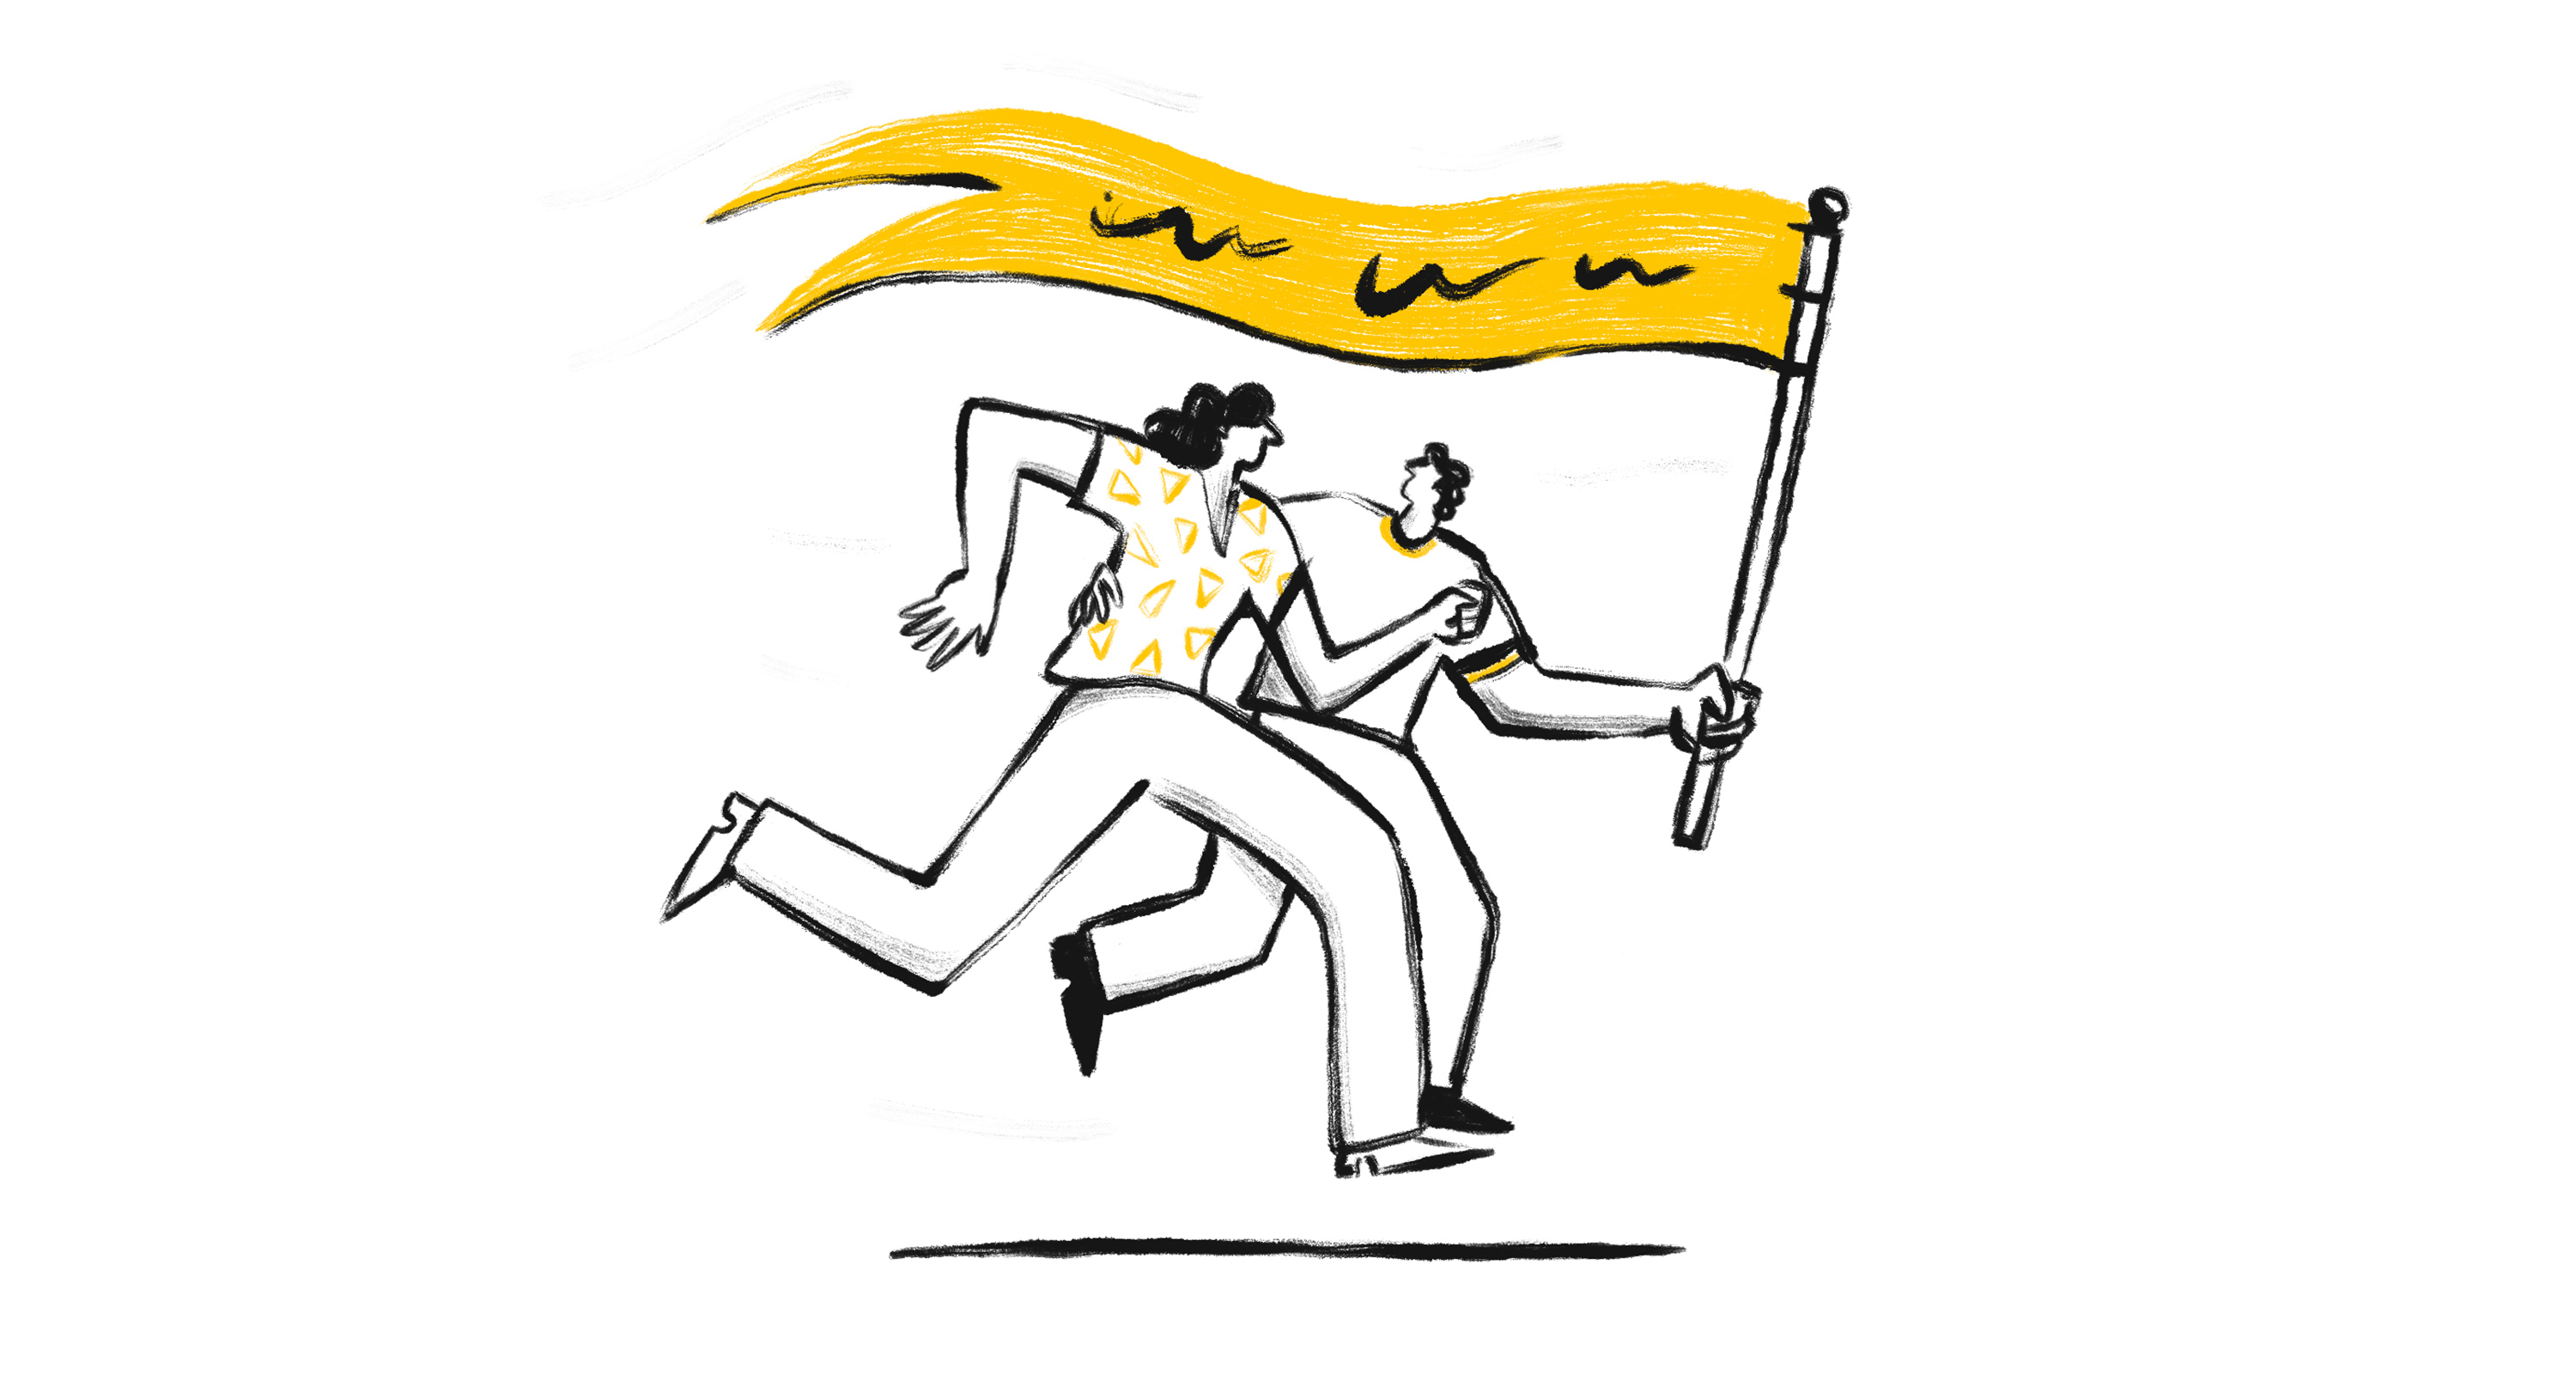 conceptual illustration of a couple running and holding a flag